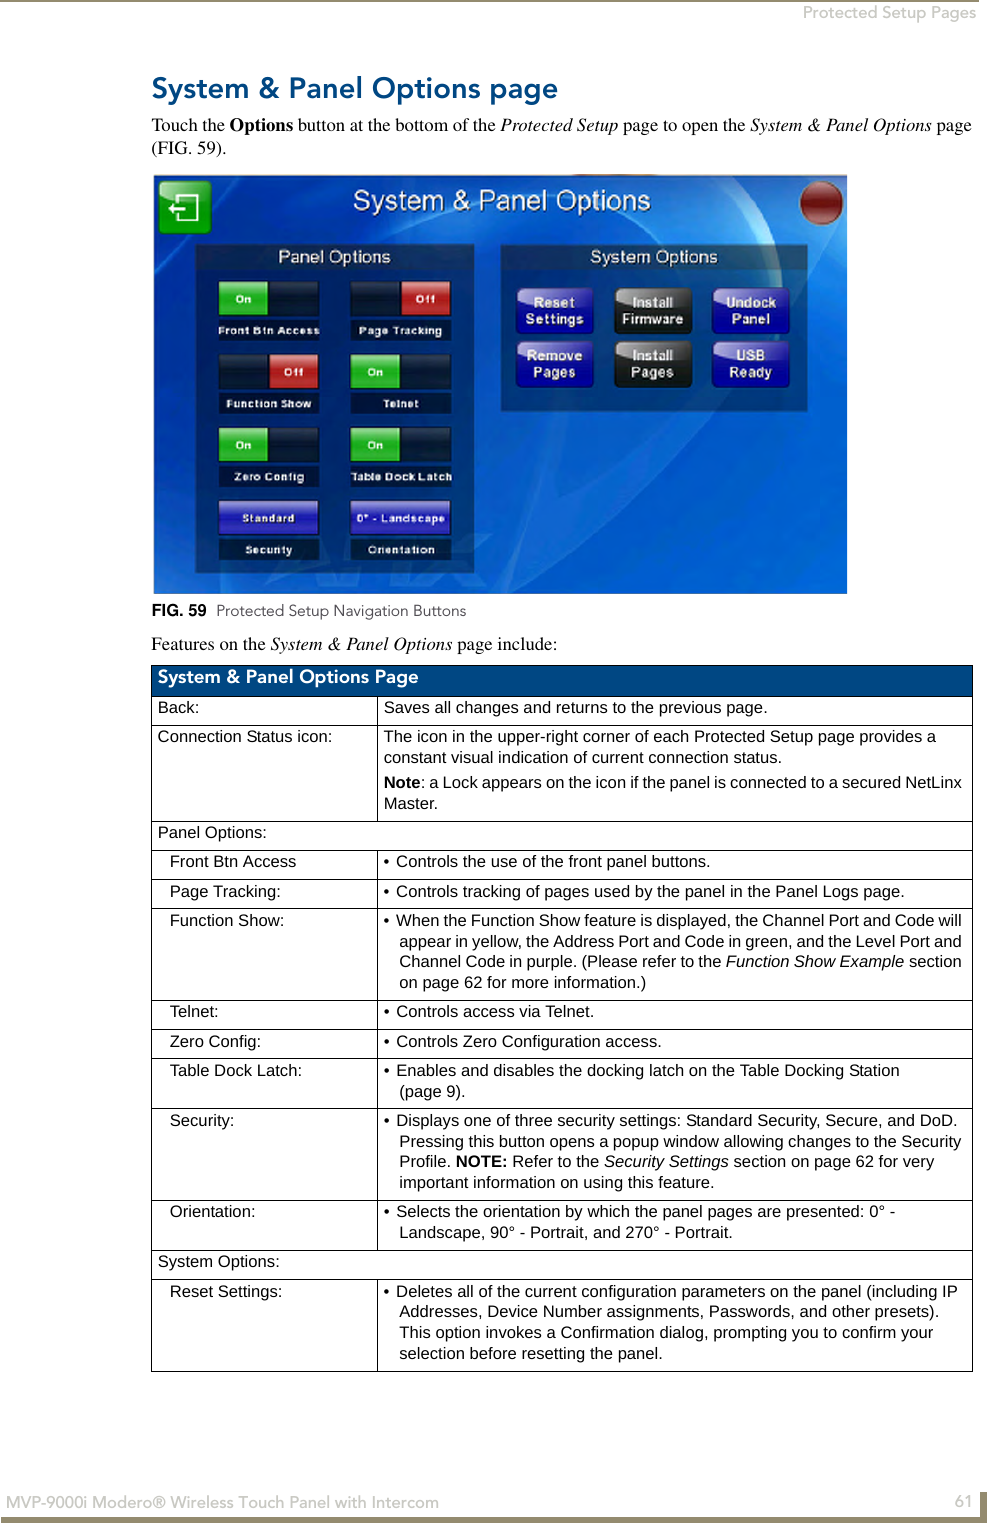 Protected Setup Pages61MVP-9000i Modero® Wireless Touch Panel with IntercomSystem &amp; Panel Options pageTouch the Options button at the bottom of the Protected Setup page to open the System &amp; Panel Options page (FIG. 59).  Features on the System &amp; Panel Options page include: FIG. 59  Protected Setup Navigation ButtonsSystem &amp; Panel Options PageBack: Saves all changes and returns to the previous page.Connection Status icon: The icon in the upper-right corner of each Protected Setup page provides a constant visual indication of current connection status.Note: a Lock appears on the icon if the panel is connected to a secured NetLinx Master.Panel Options:Front Btn Access • Controls the use of the front panel buttons.Page Tracking: • Controls tracking of pages used by the panel in the Panel Logs page.Function Show: • When the Function Show feature is displayed, the Channel Port and Code will appear in yellow, the Address Port and Code in green, and the Level Port and Channel Code in purple. (Please refer to the Function Show Example section on page 62 for more information.)Telnet: • Controls access via Telnet.Zero Config: • Controls Zero Configuration access.Table Dock Latch: • Enables and disables the docking latch on the Table Docking Station (page 9).Security: • Displays one of three security settings: Standard Security, Secure, and DoD. Pressing this button opens a popup window allowing changes to the Security Profile. NOTE: Refer to the Security Settings section on page 62 for very important information on using this feature.Orientation: • Selects the orientation by which the panel pages are presented: 0° - Landscape, 90° - Portrait, and 270° - Portrait.System Options:Reset Settings: • Deletes all of the current configuration parameters on the panel (including IP Addresses, Device Number assignments, Passwords, and other presets). This option invokes a Confirmation dialog, prompting you to confirm your selection before resetting the panel. 